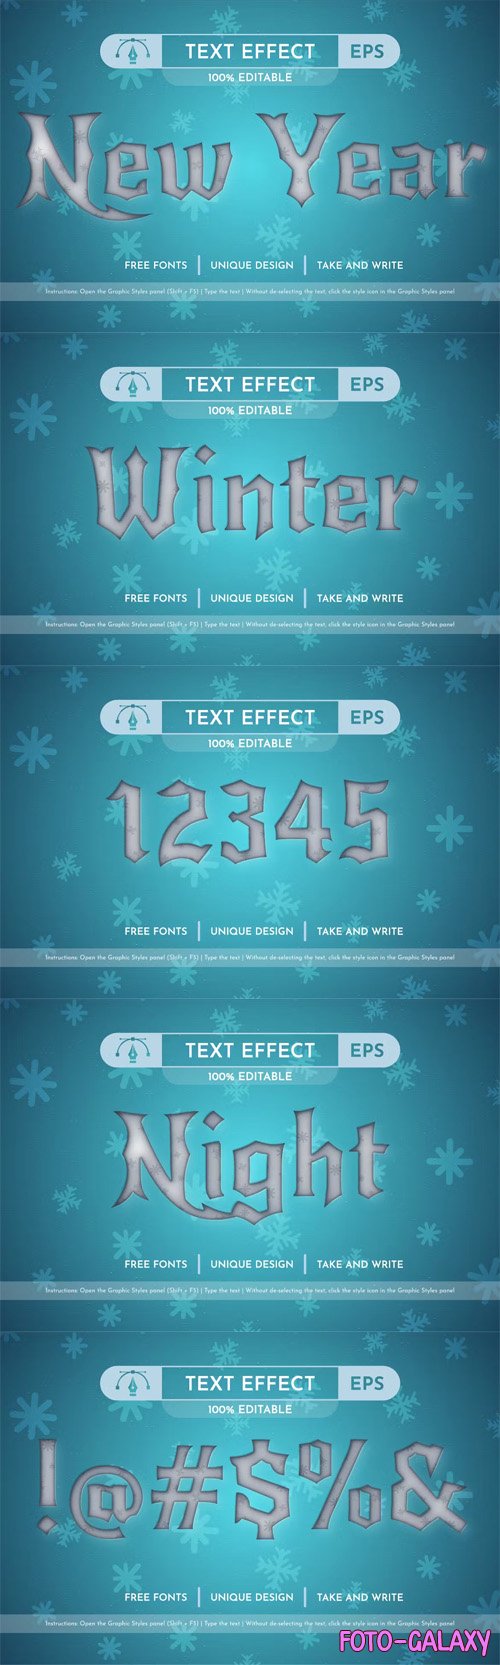 New Year Text Effect for Illustrator